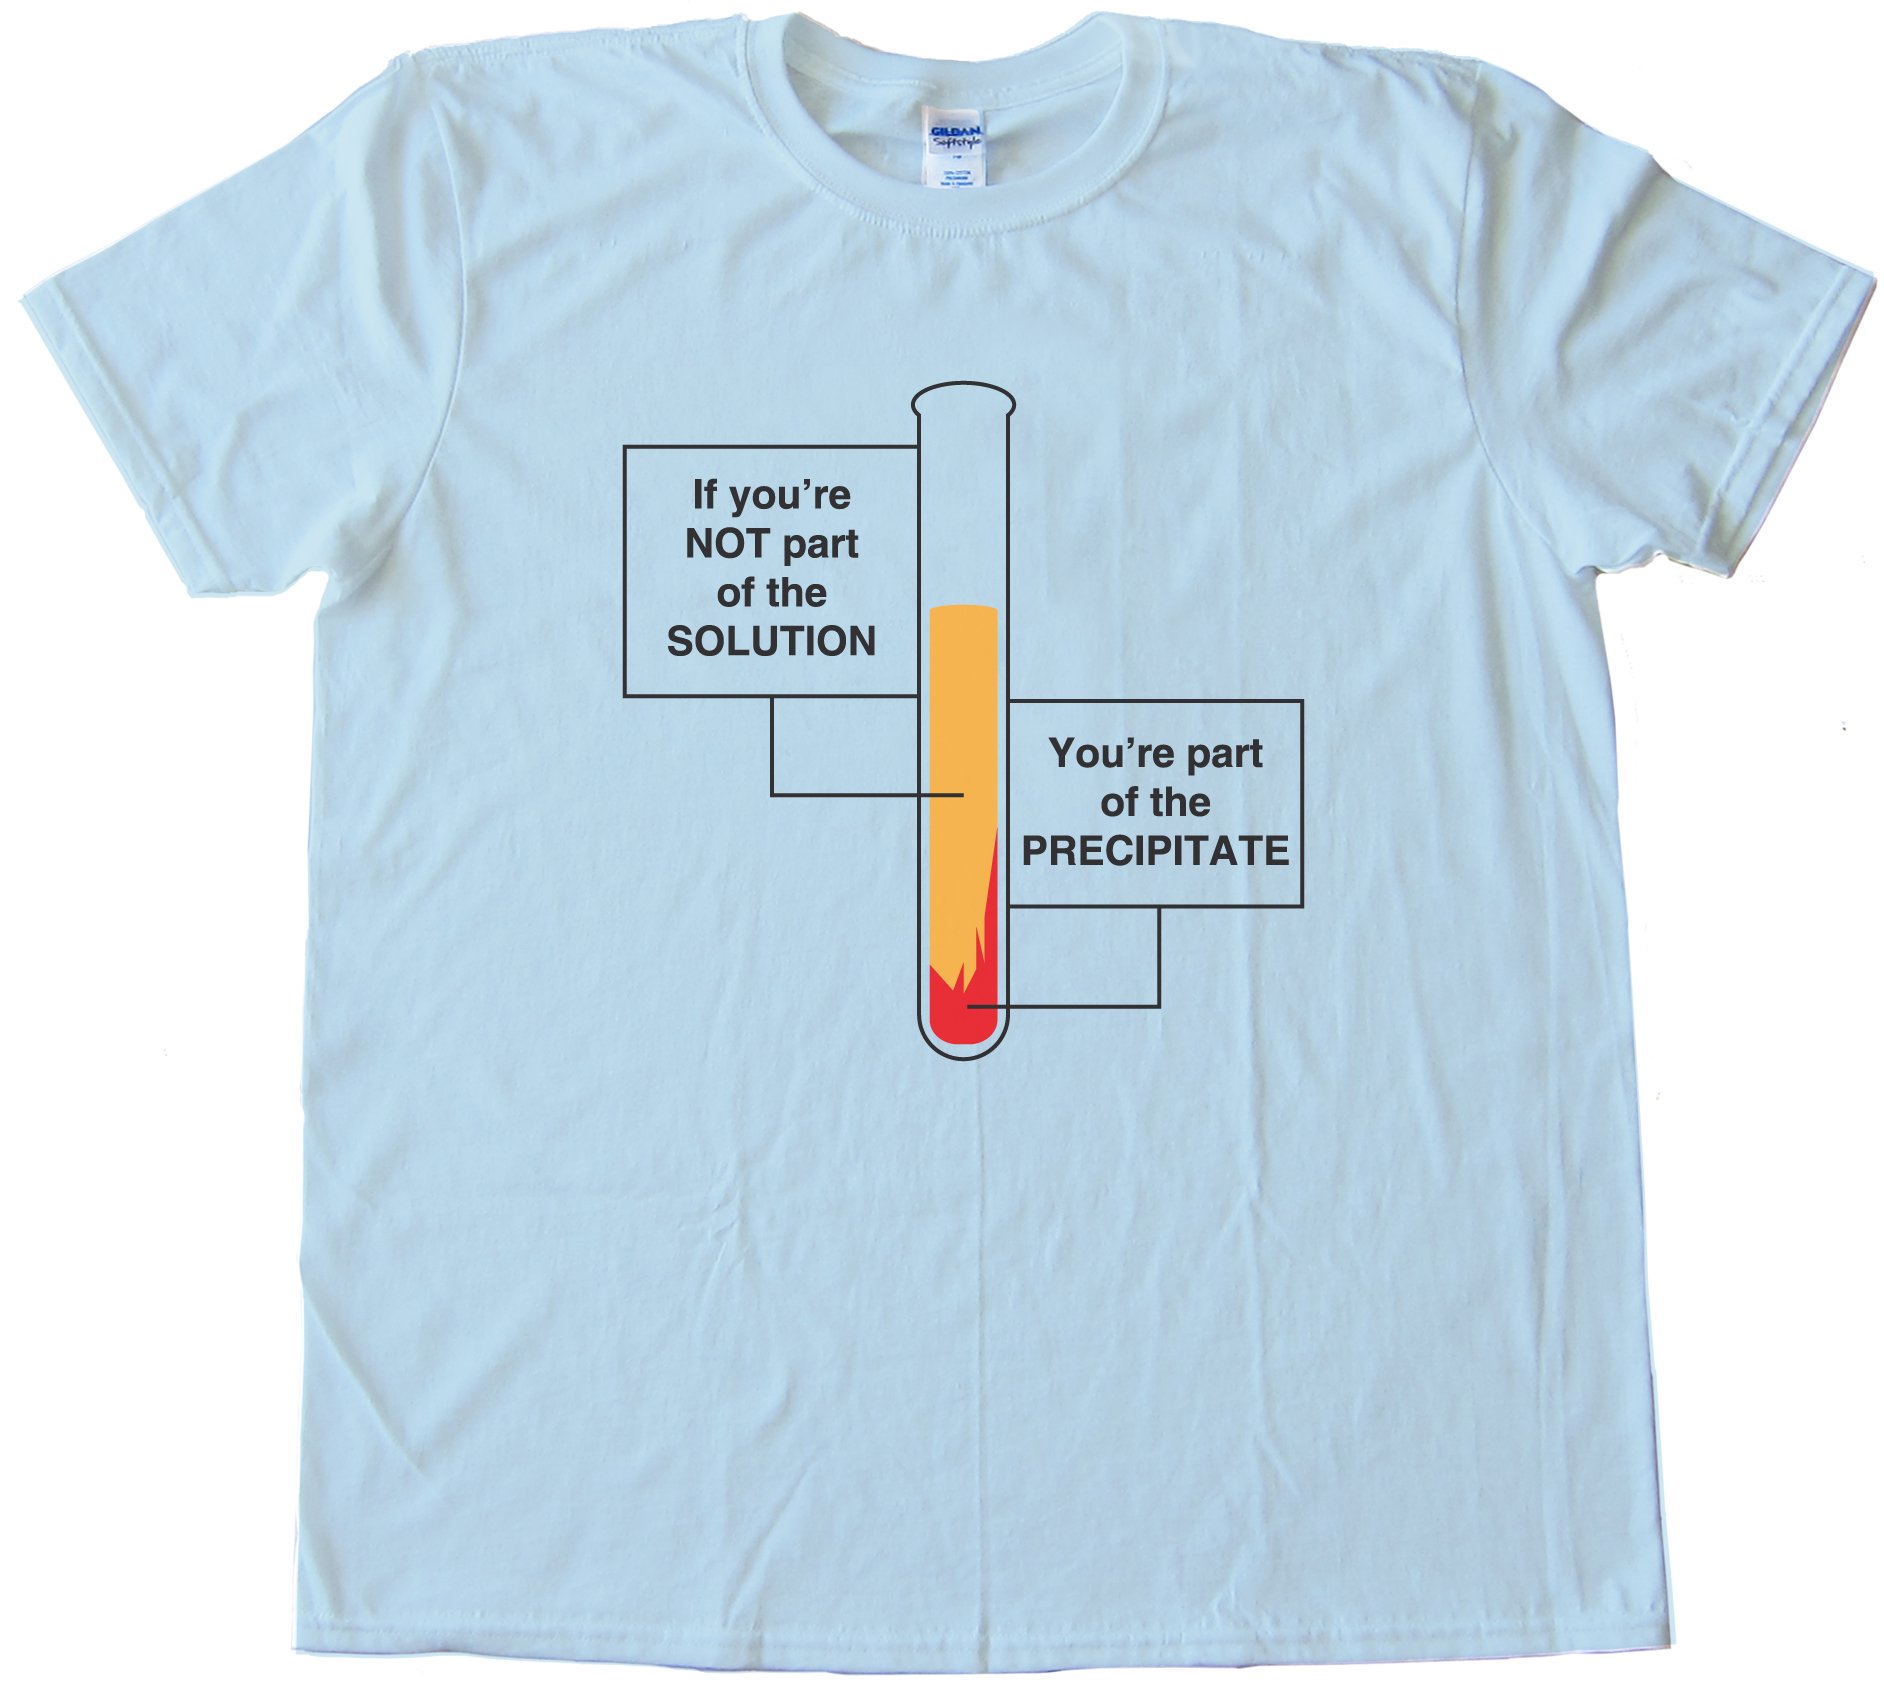 If You'Re Not Part Of The Solution - You'Re Part Of The Precipitate Tee Shirt